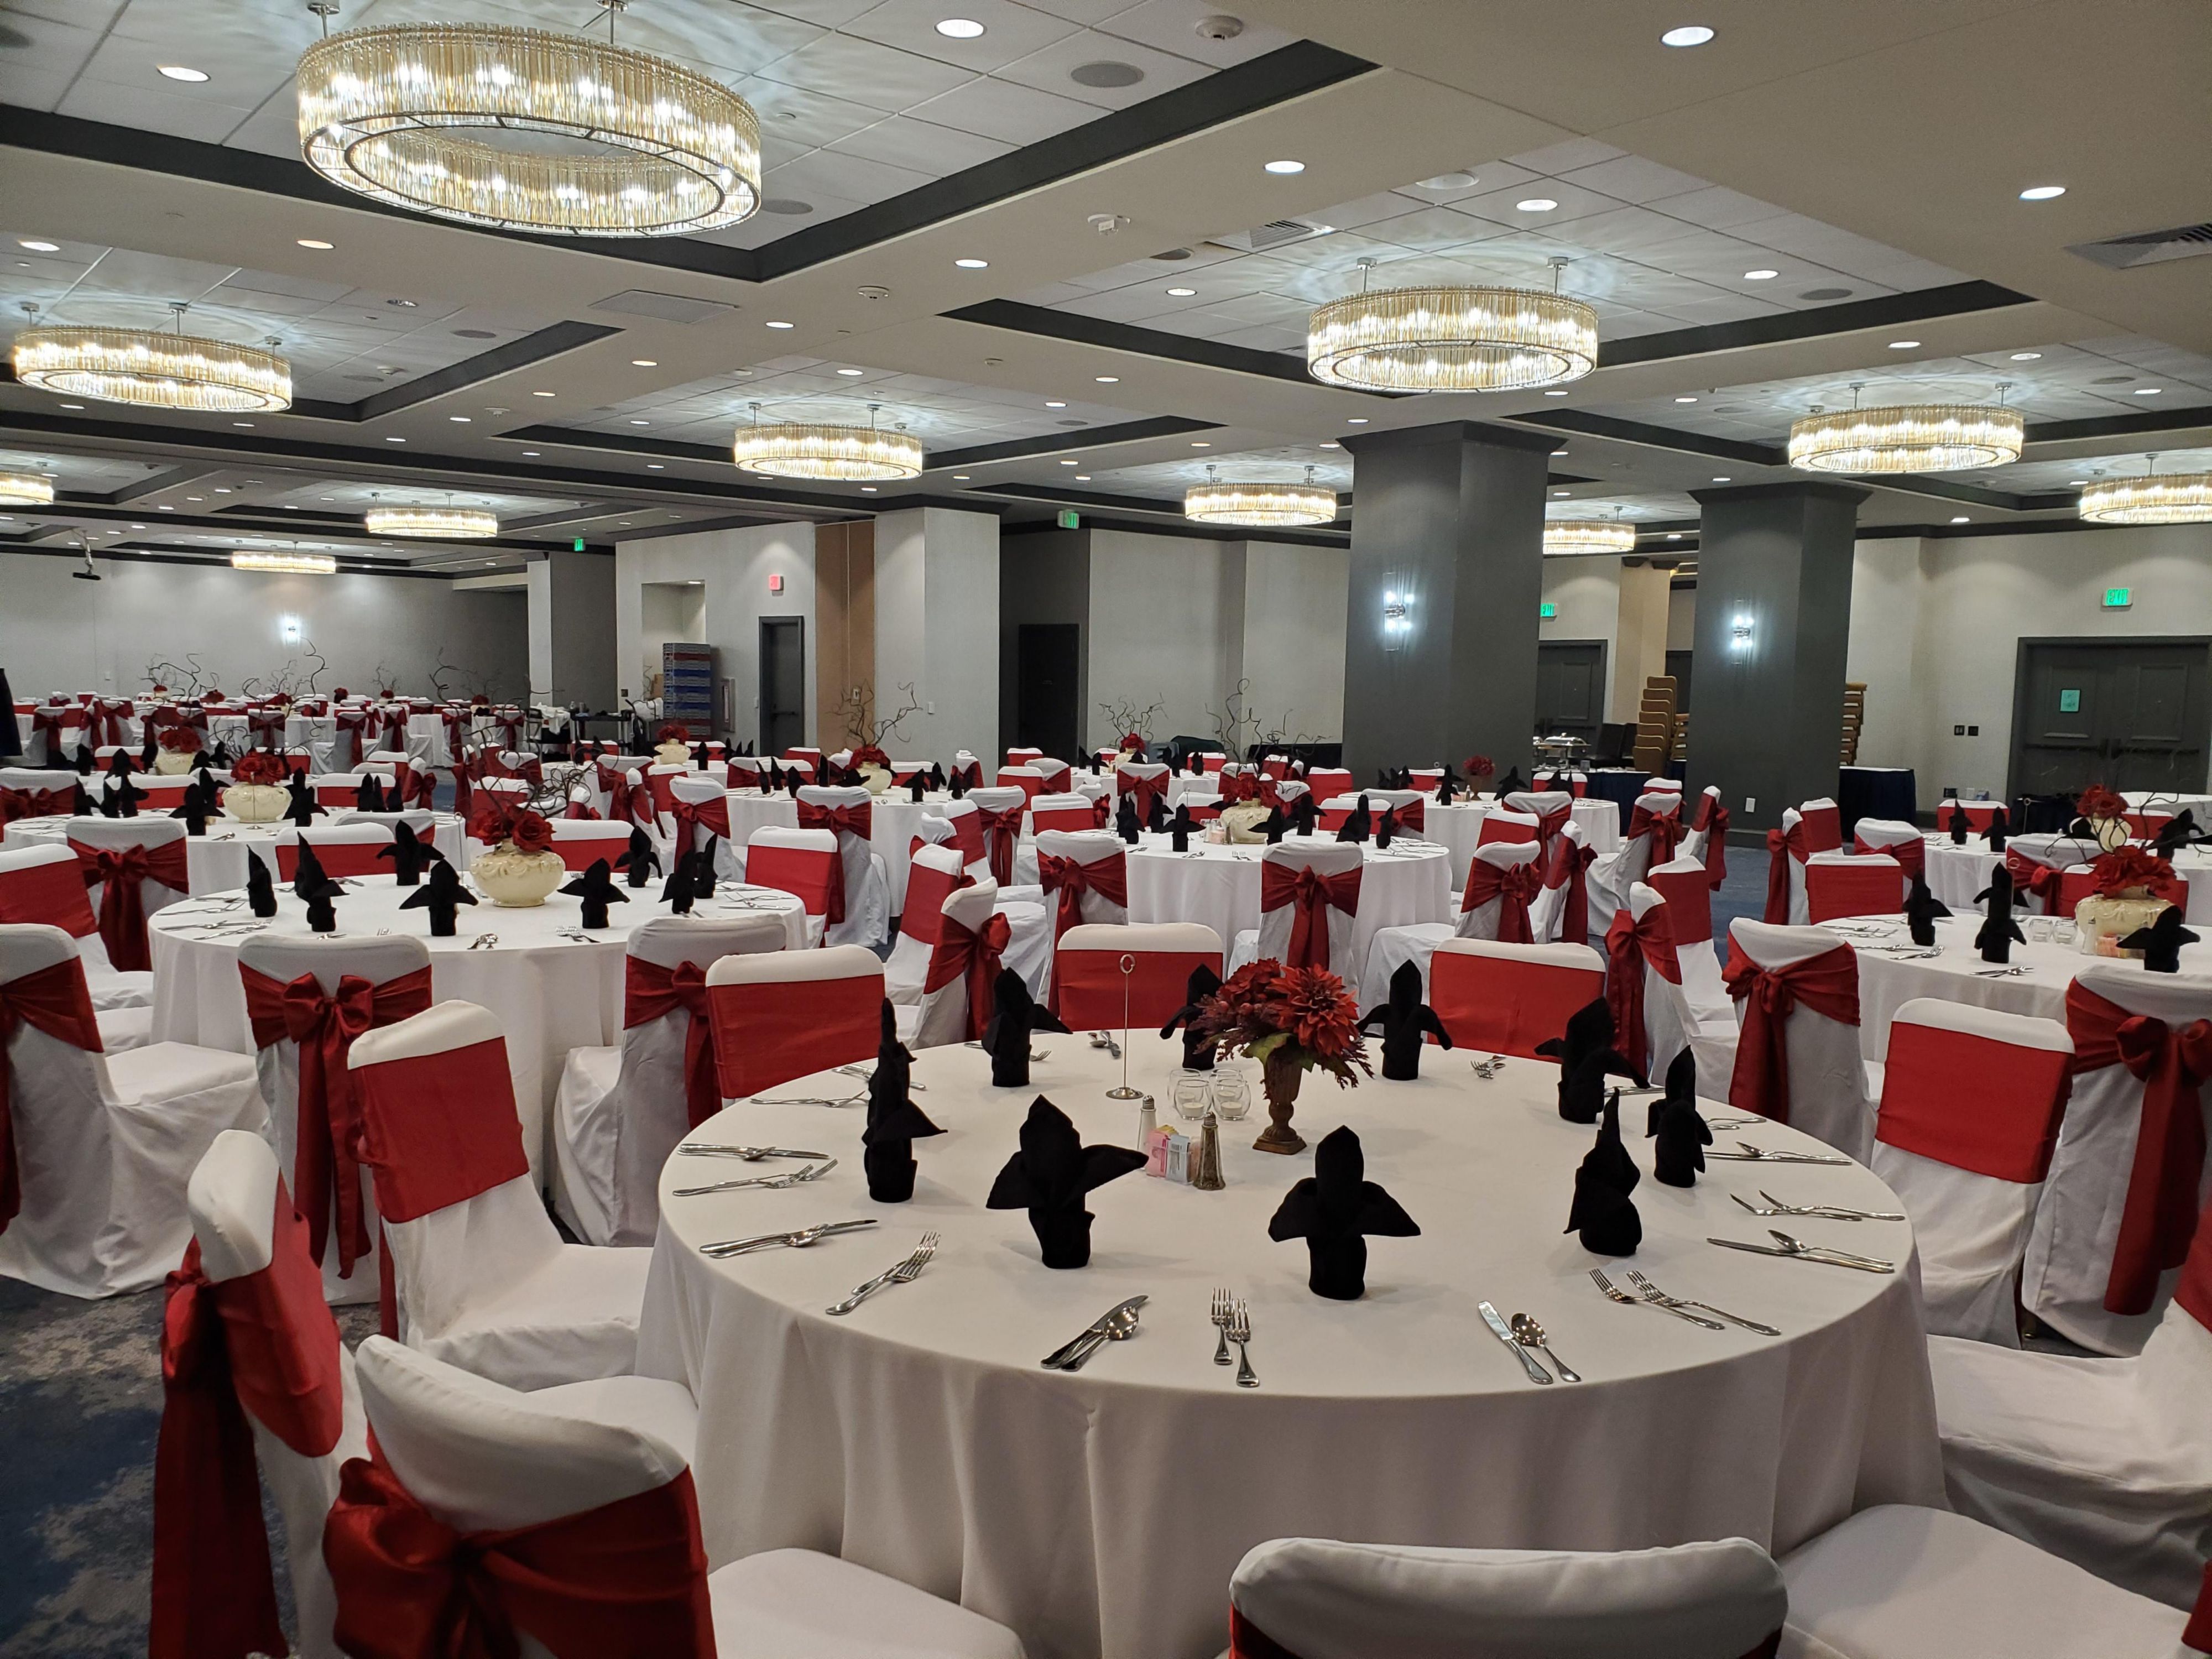 The Crowne Plaza Dallas Downtown hotel is located in the heart of downtown Dallas and offers over 30,000 sq. ft. of meeting space that can accommodate more than 600 plus people. They also have a Crowne Meetings Director who can help you plan your event.